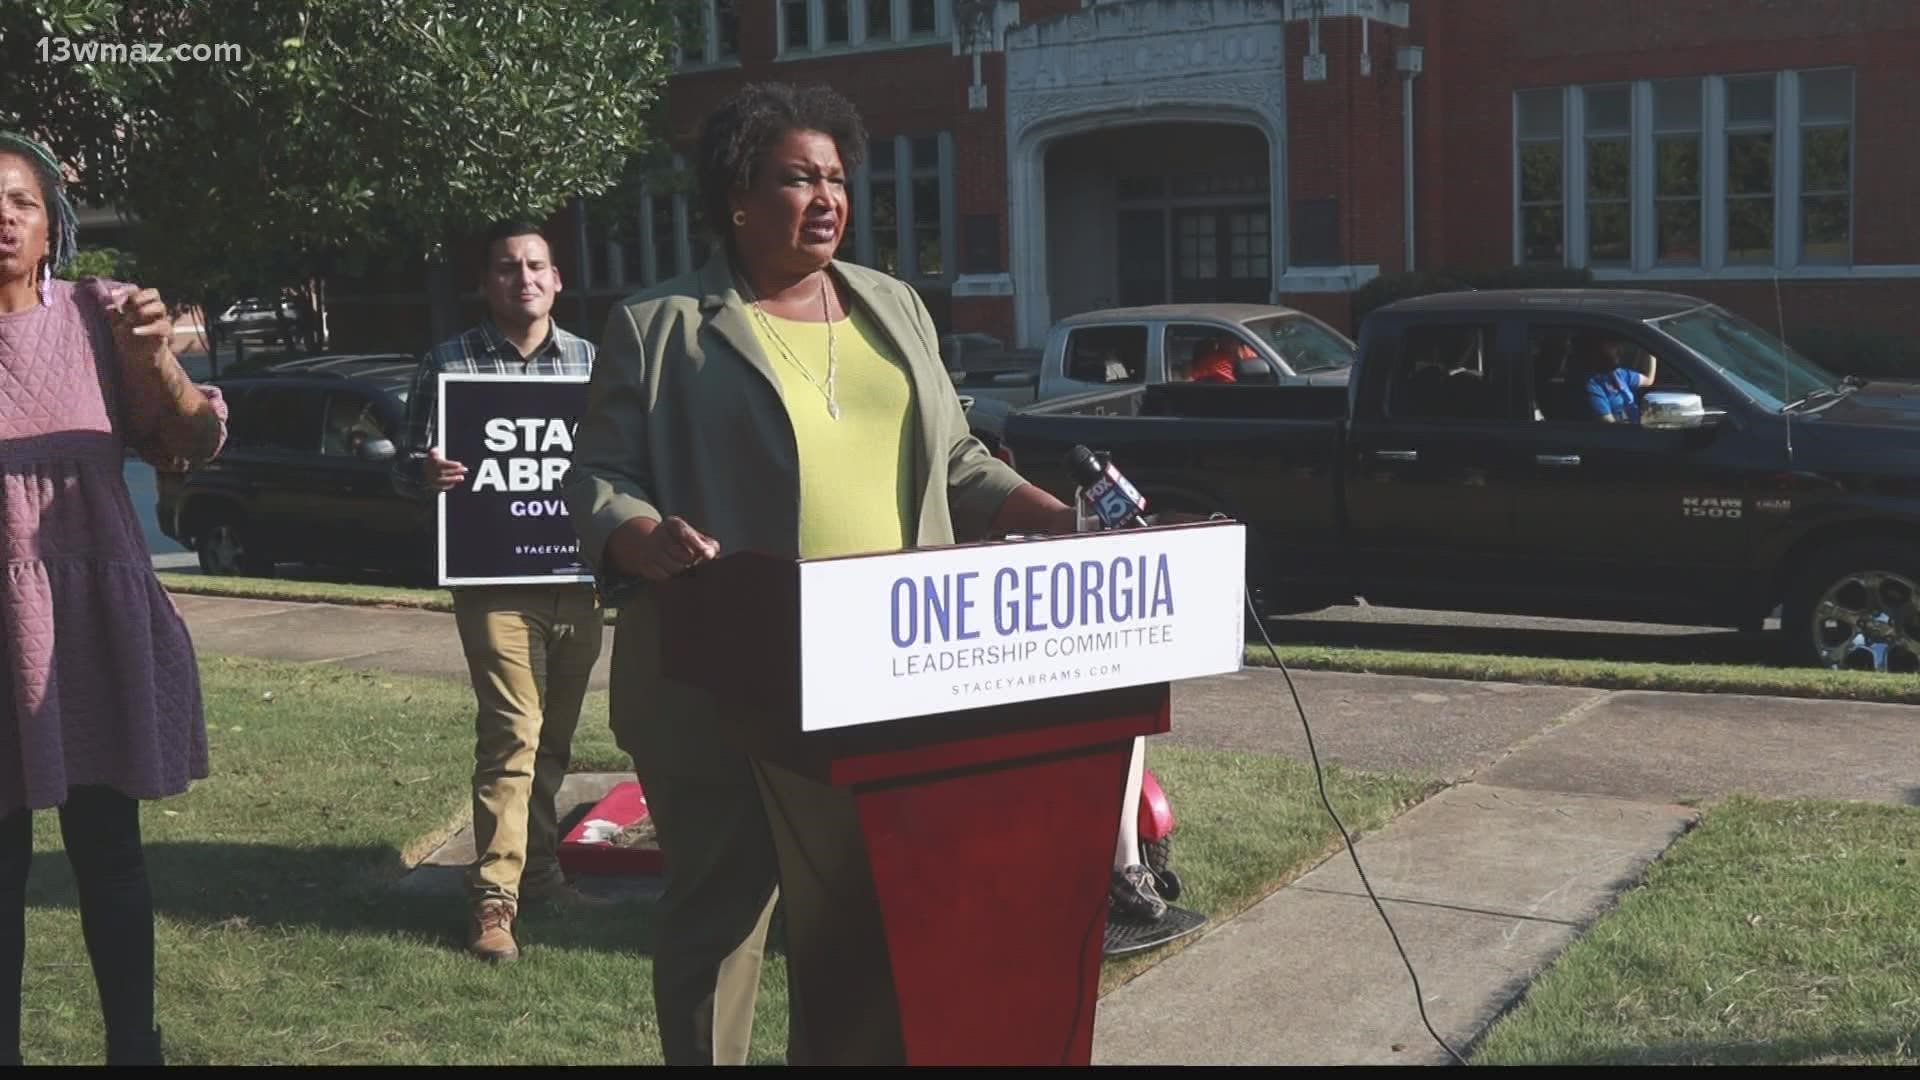 The Democratic candidate for governor says her policy of expanding Medicaid coverage could have helped keep Atlanta Medical Center open.